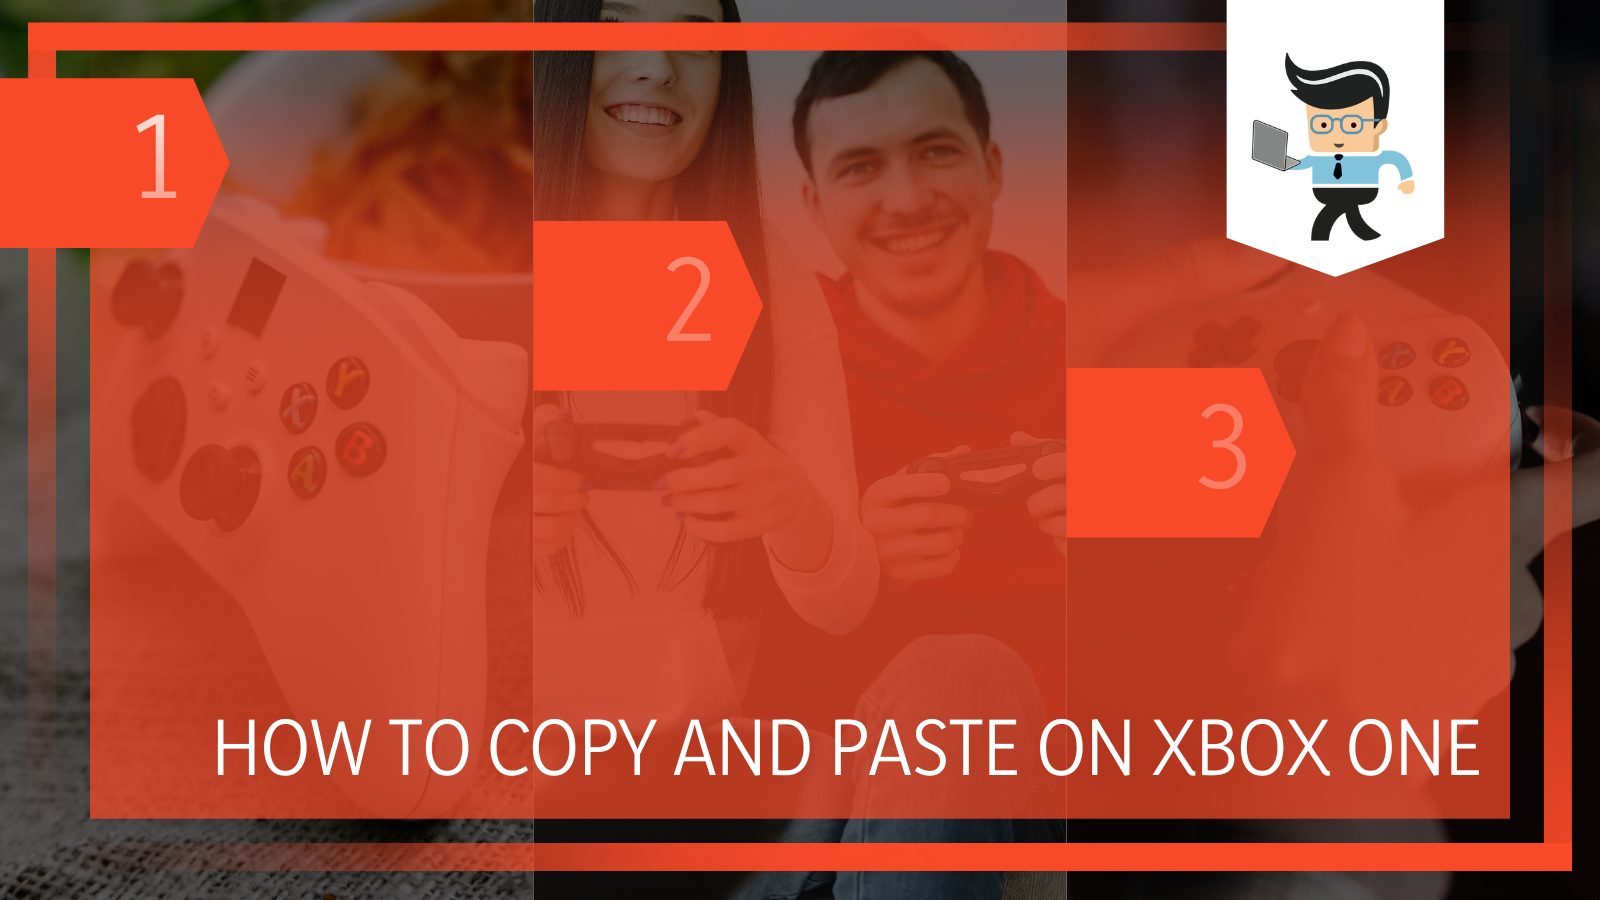 How to Copy and Paste on Xbox One